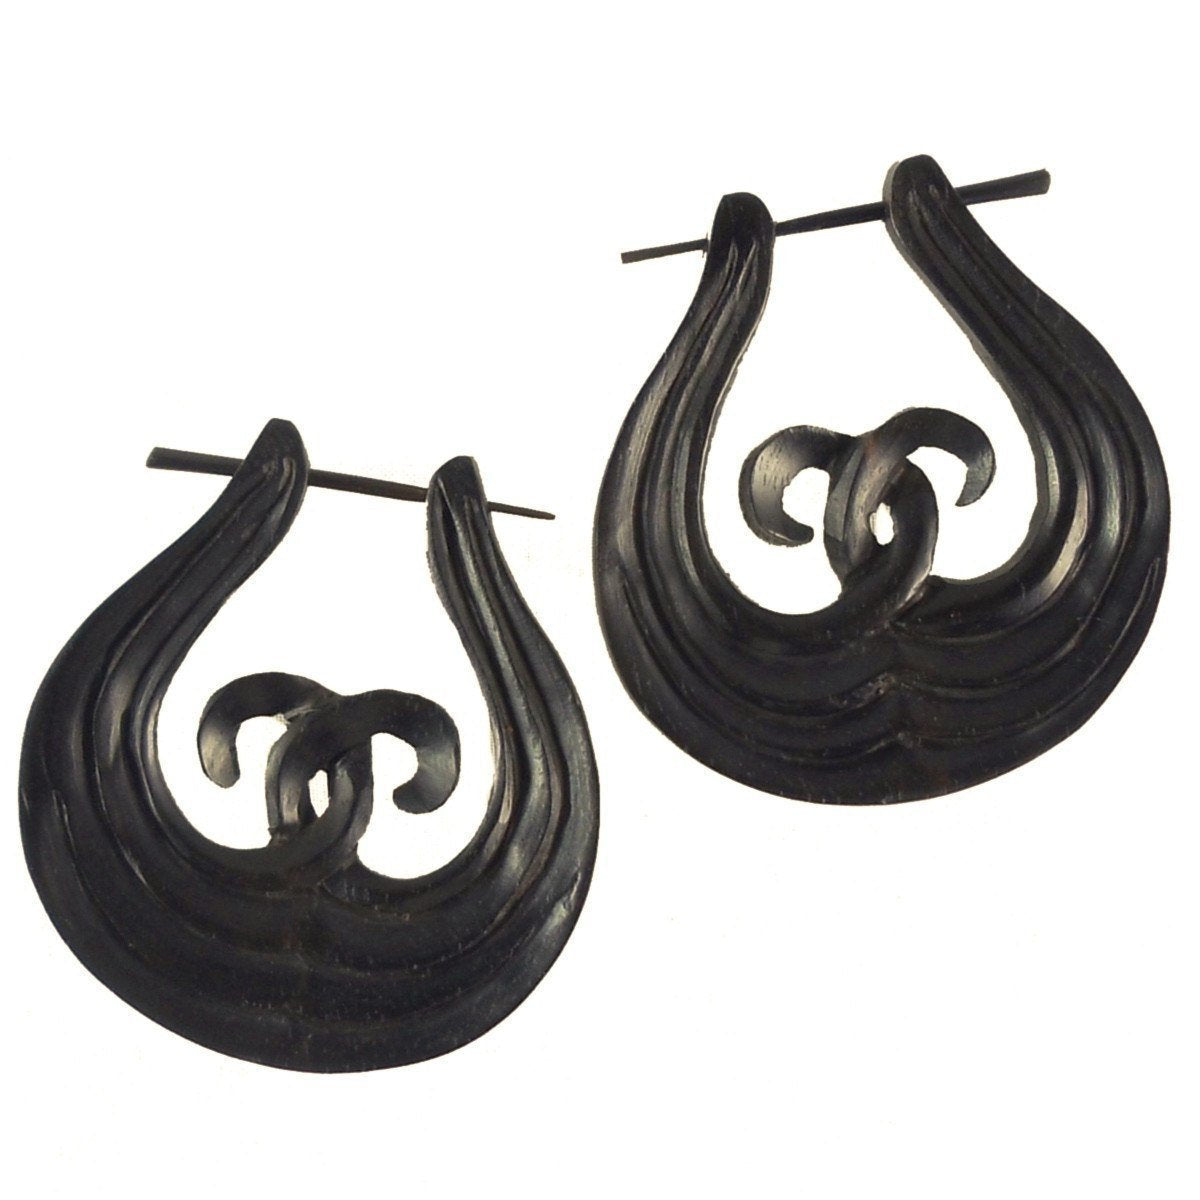 Natural Jewelry :|: Unity. Wooden Earrings, Natural Black Wood. | Wooden Earrings